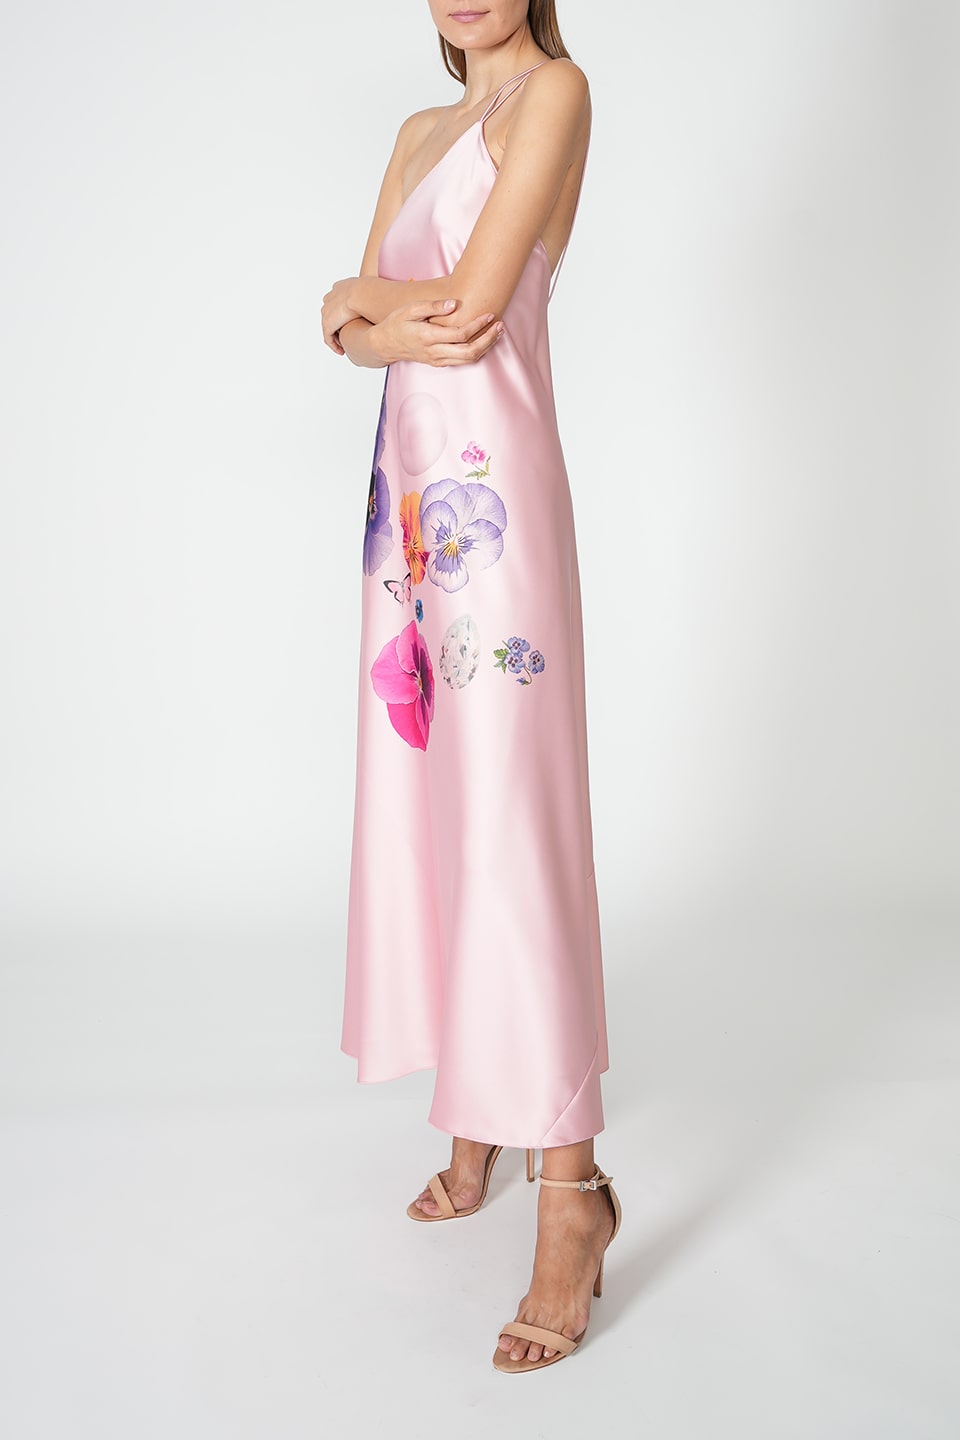 Thumbnail for Product gallery 2, Printed Satin Dress Rose